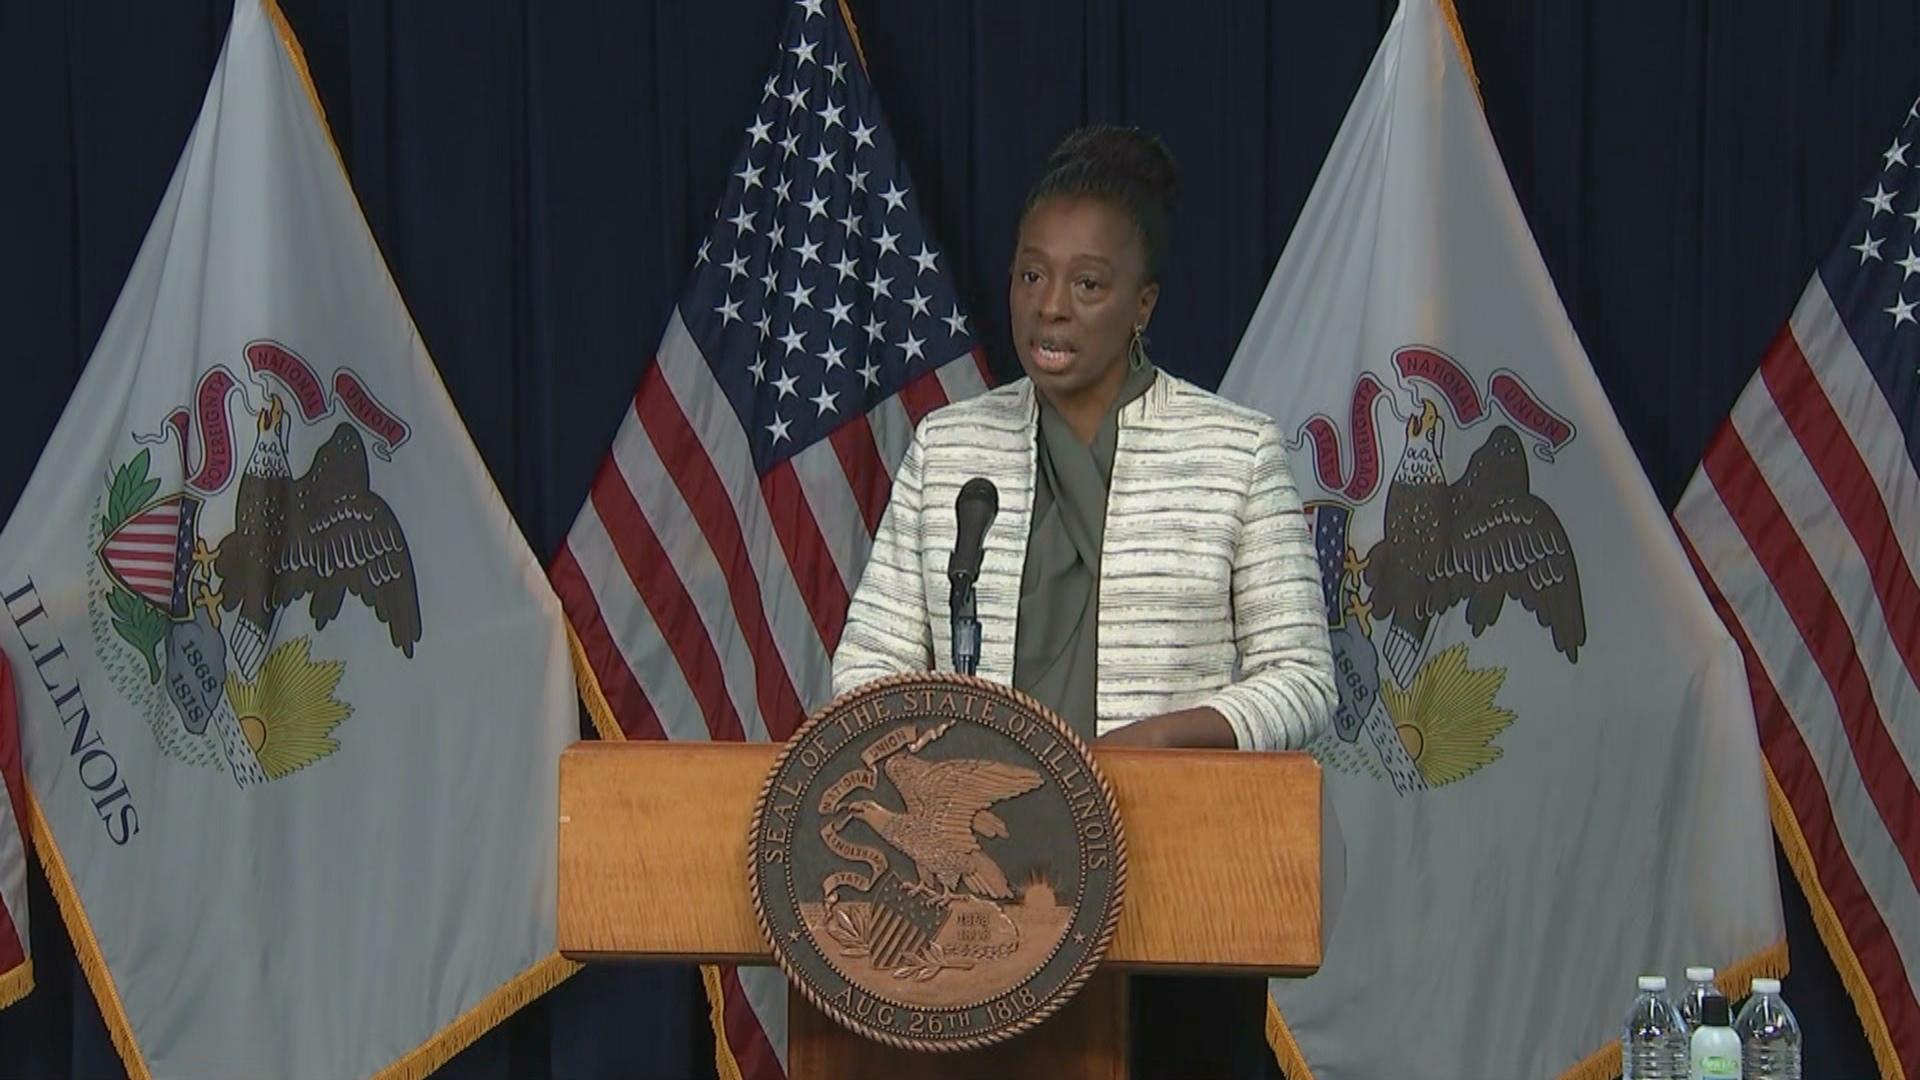 Illinois Department of Public Health Director Dr. Ngozi Ezike talks Wednesday, Dec. 2, 2020 during the state’s daily COVID-19 briefing. (WTTW News)